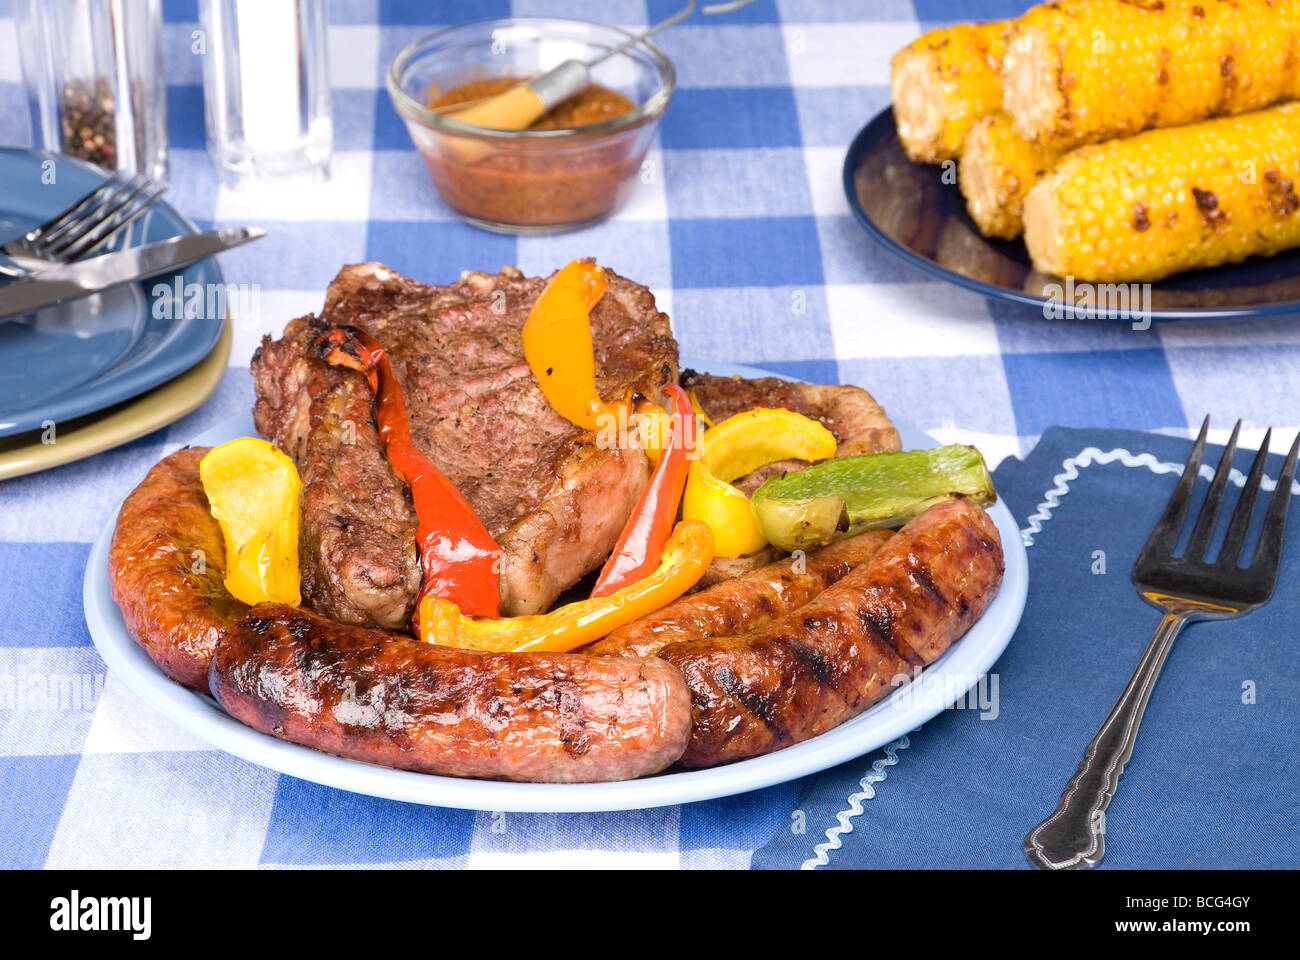 A bratwurst and steak dinner with corn on the cob on a picnic table and tablecloth Stock Photo